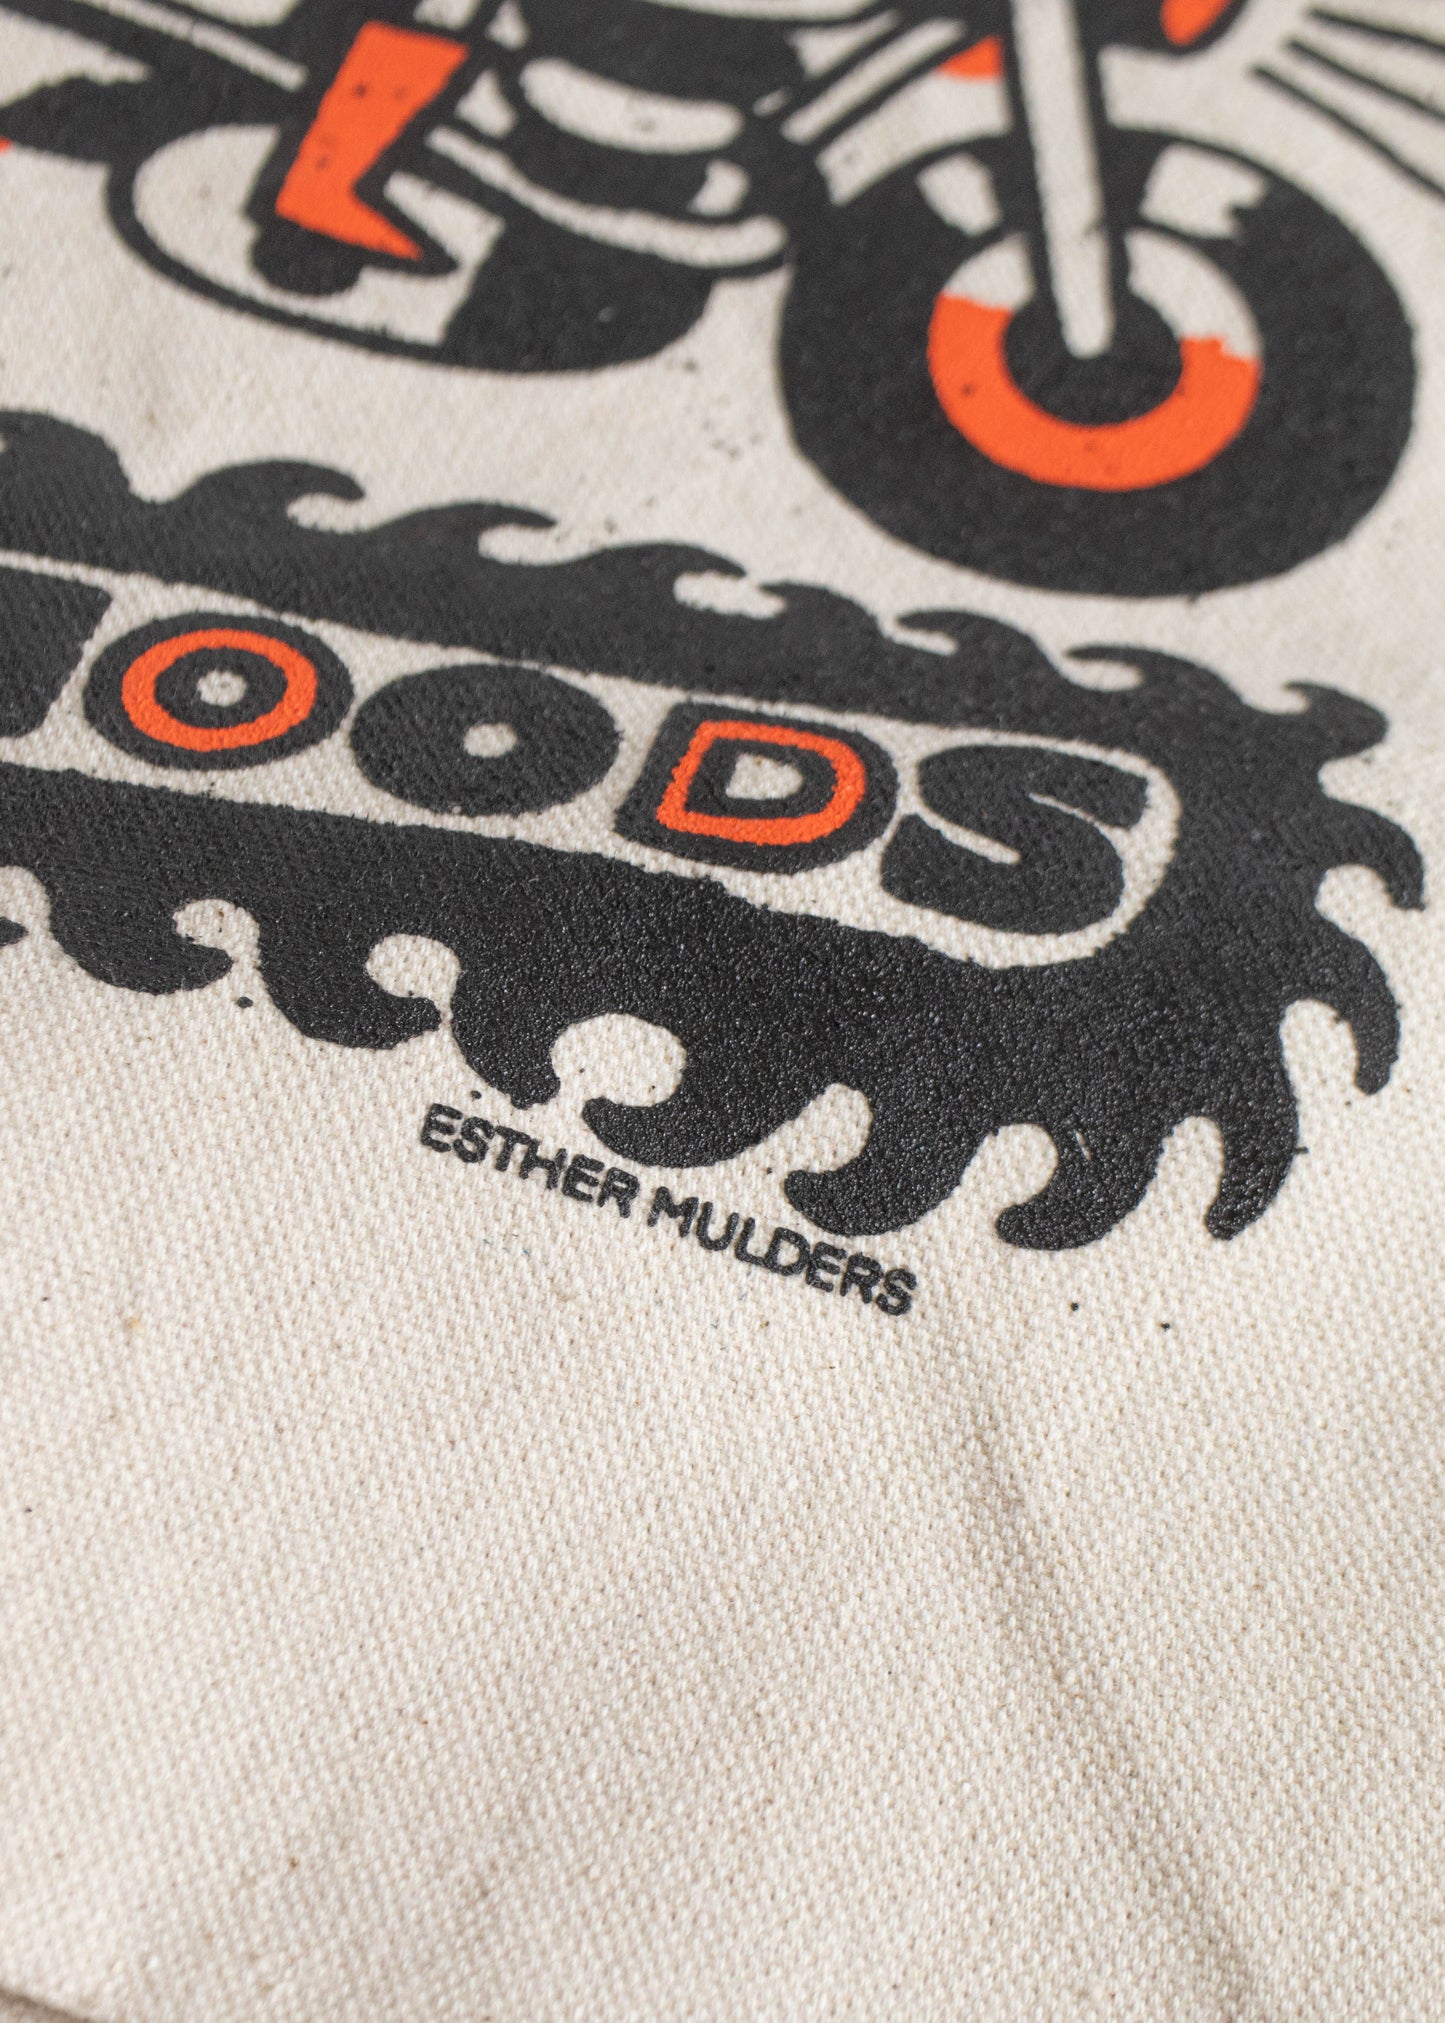 Esther Mulders X Palmo Goods Artist Edition Tote Bag